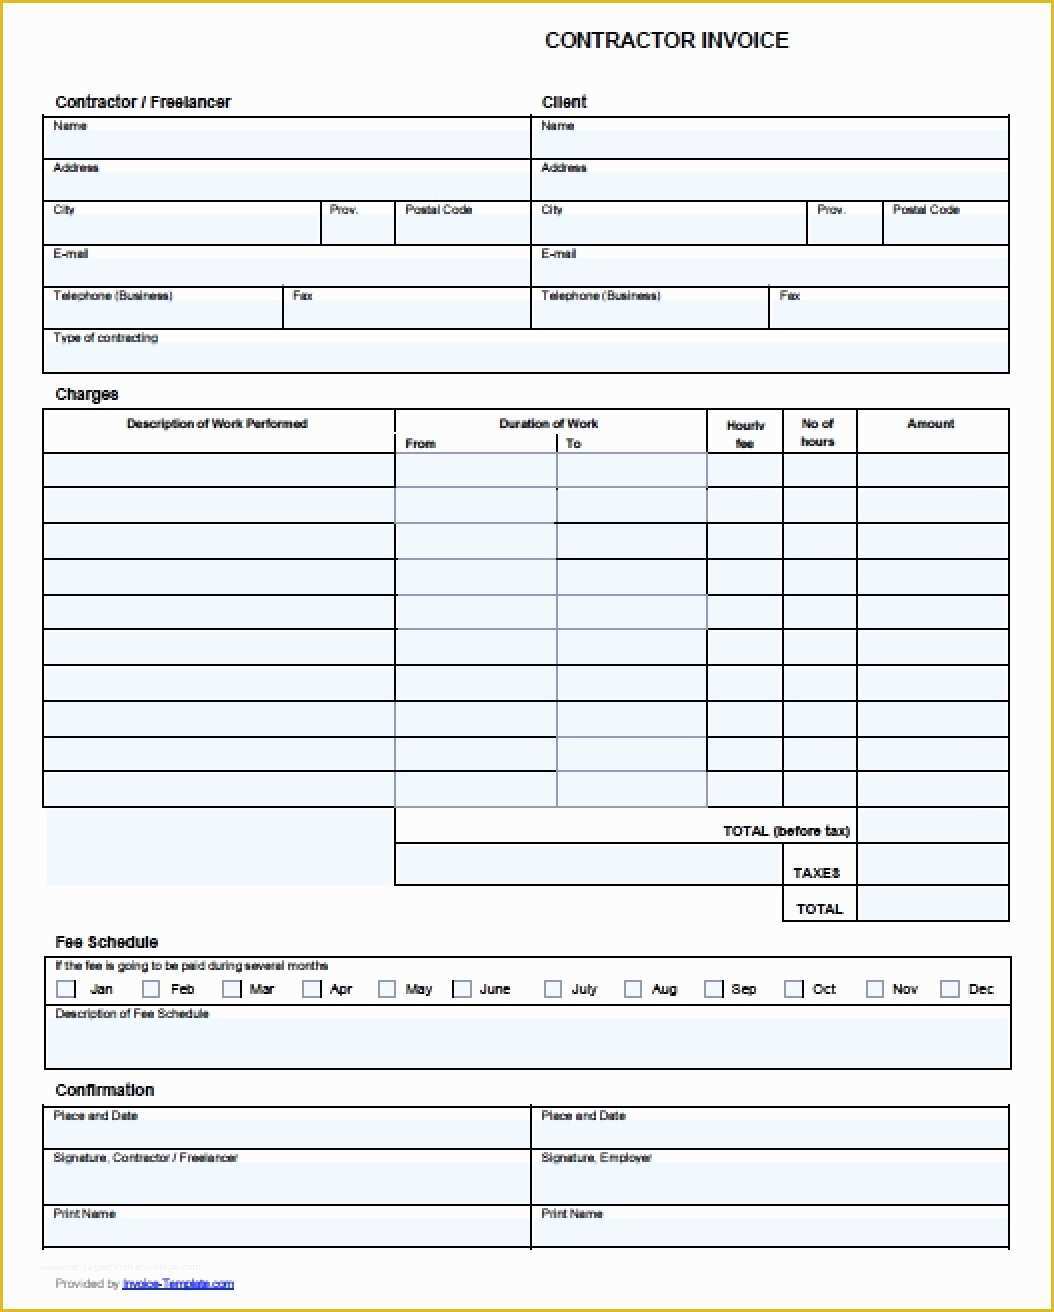 Independent Contractor Invoice Template Free Of Independent Contractor Invoice Template Excel 50 New Free